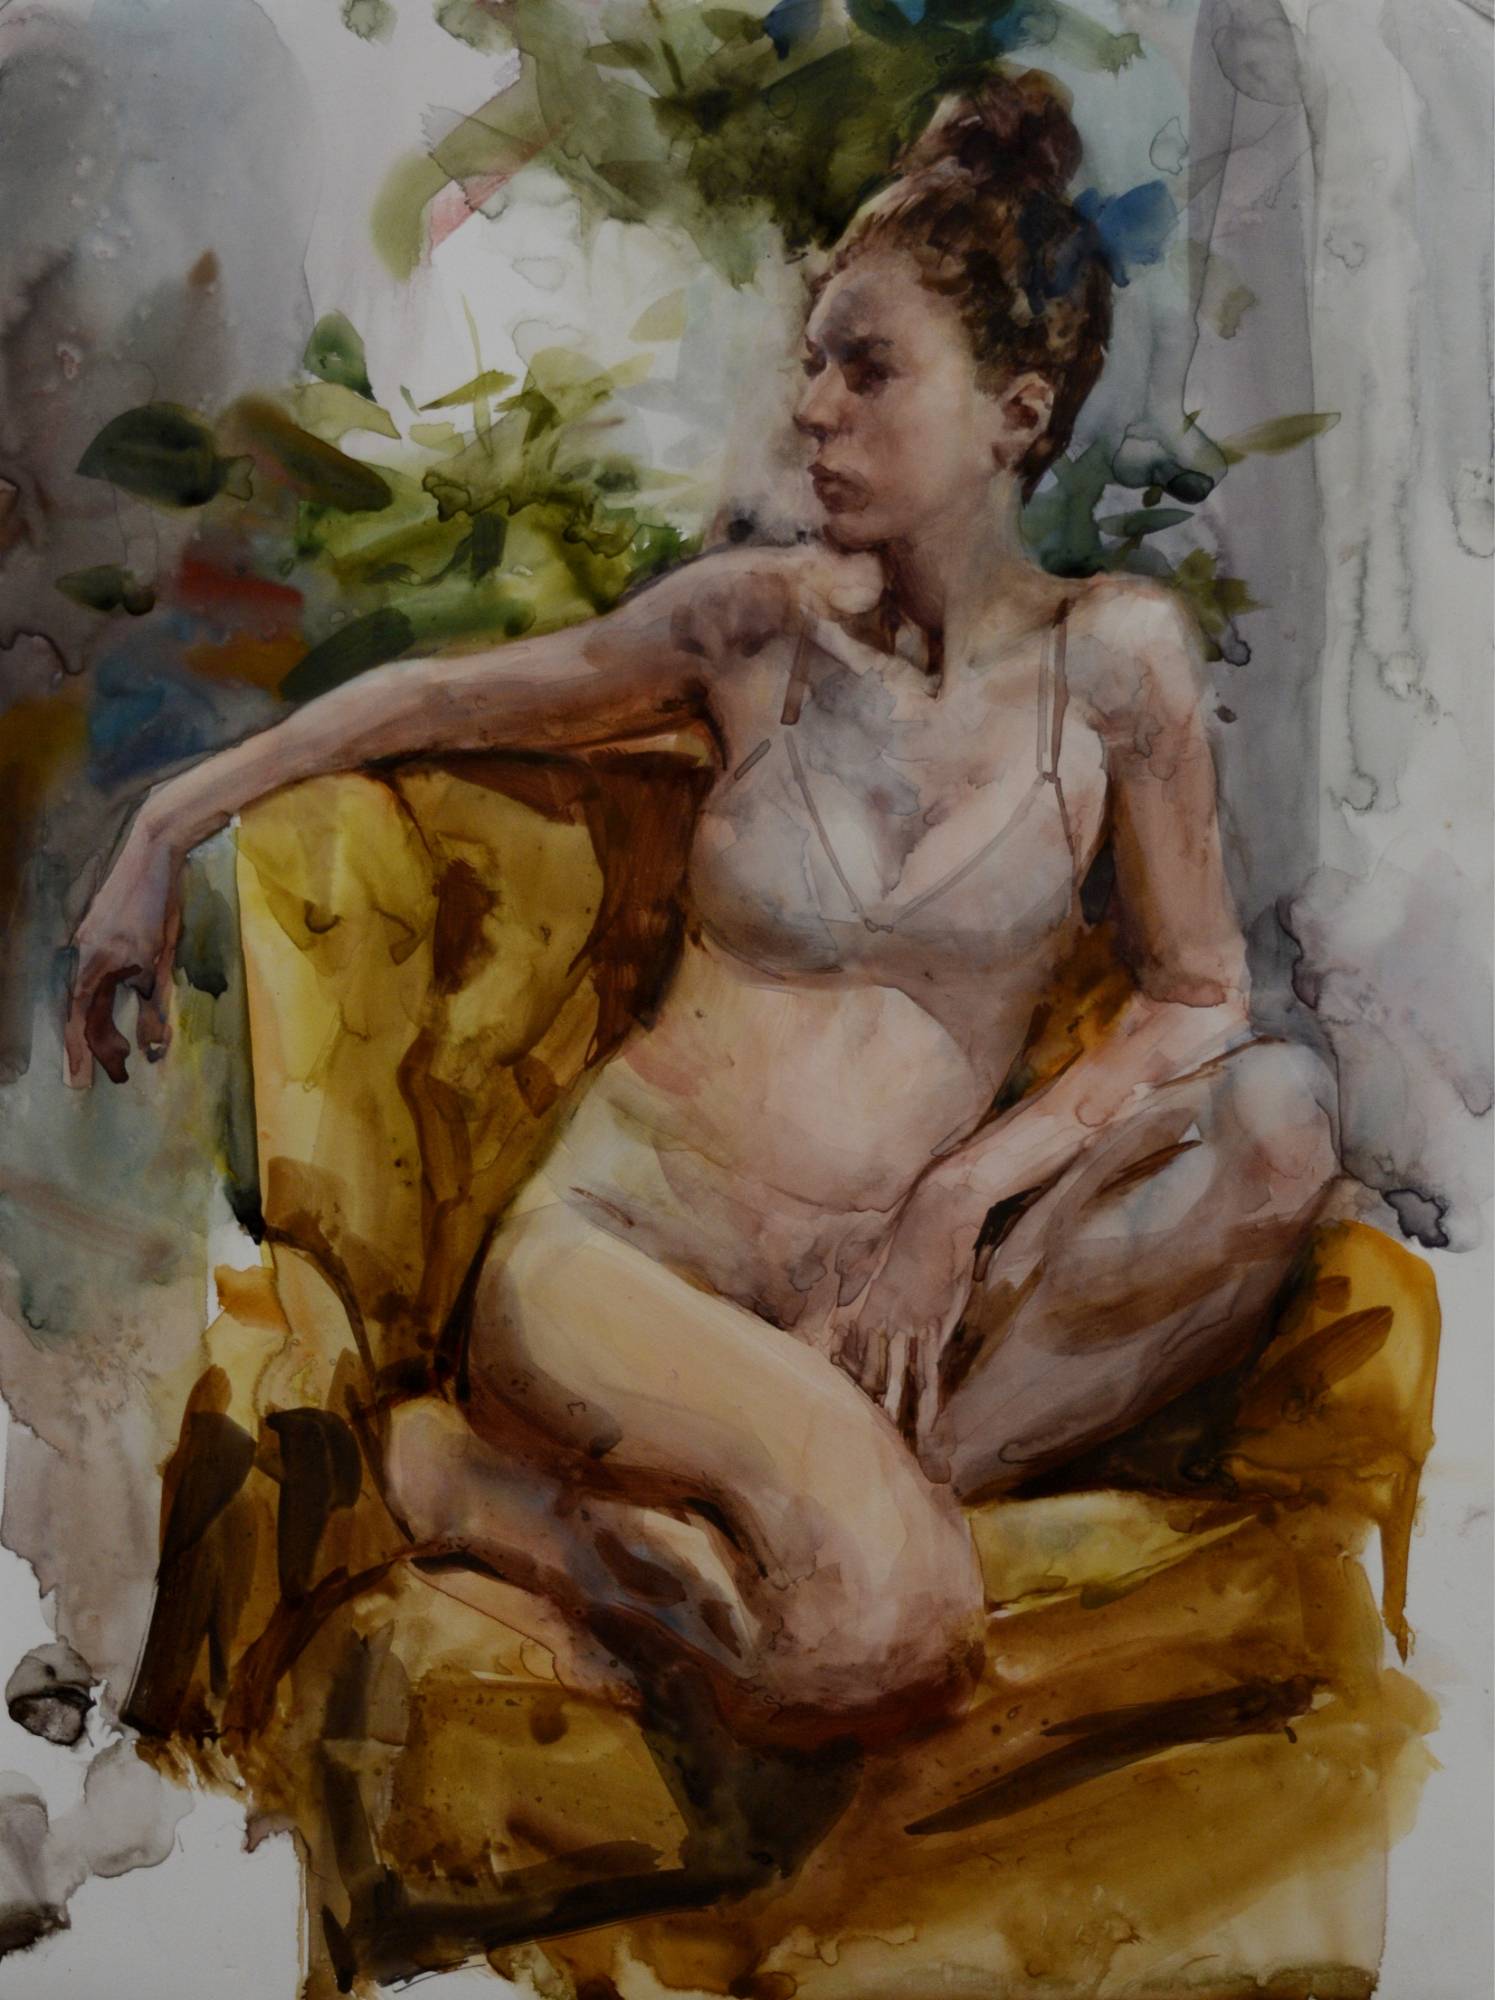 watercolor painting of a female figure posing on a gold fabric chair with plants in the background